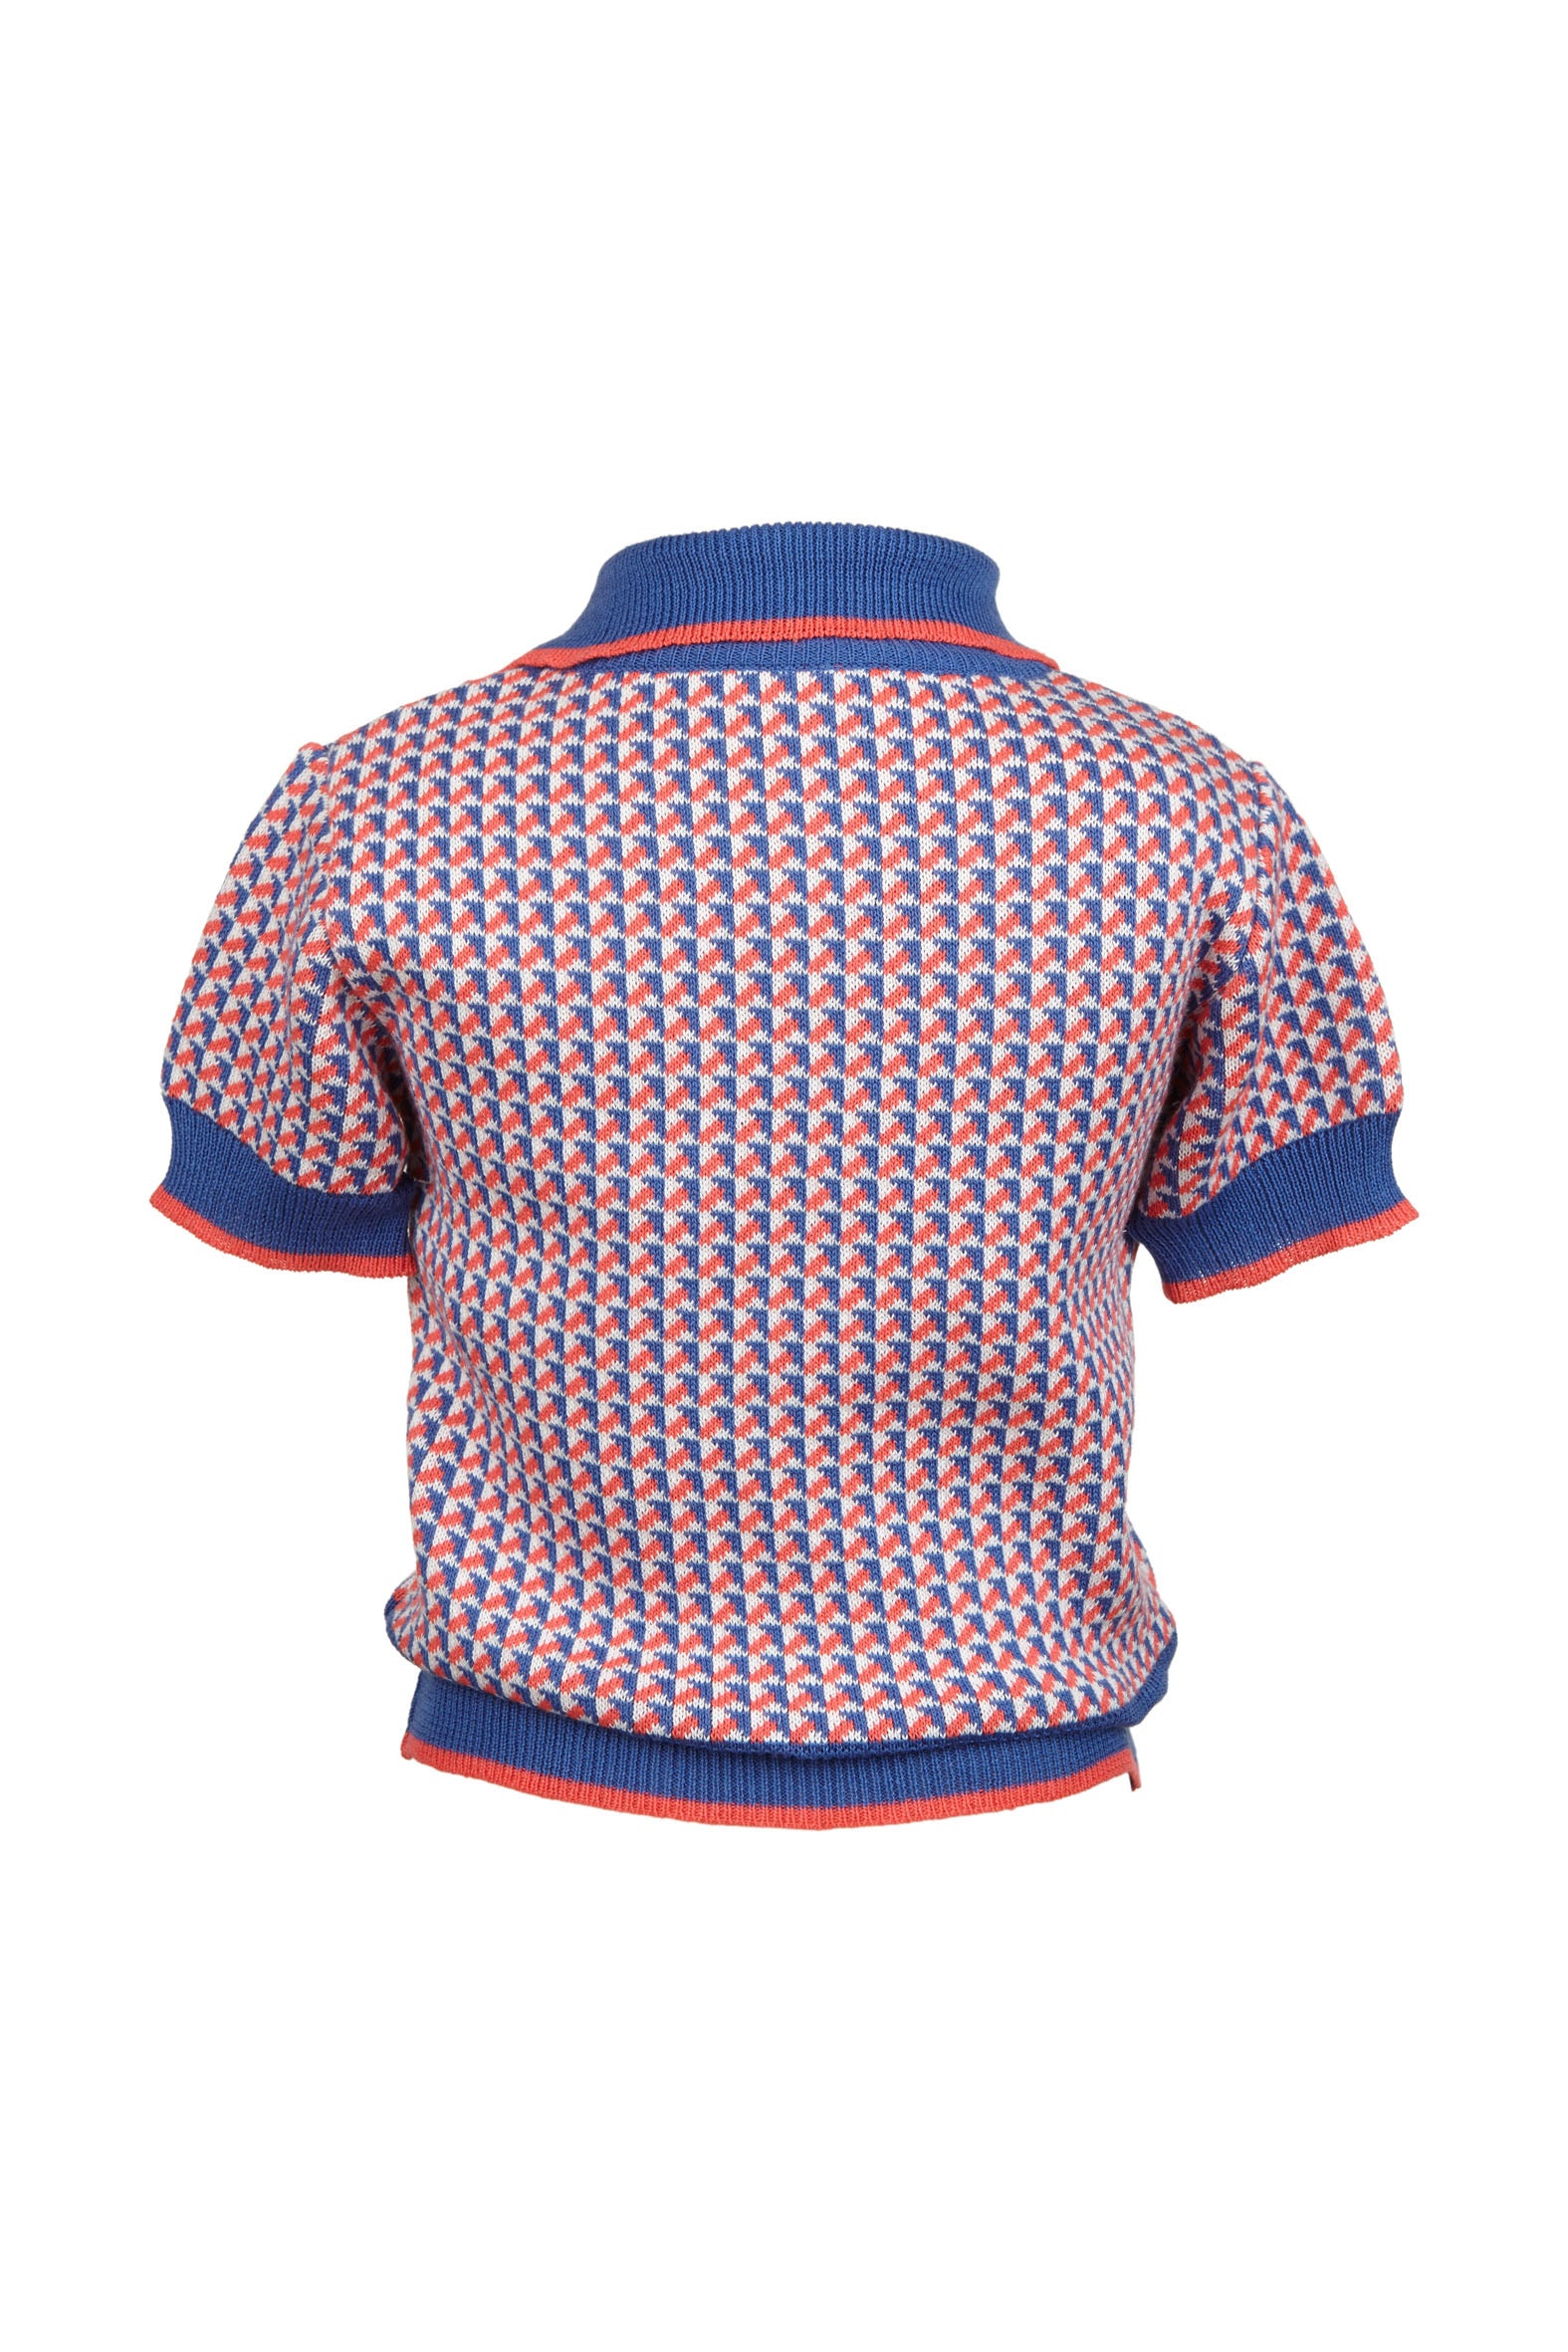 Children's Top - Blue/Coral Fly Away - Palava